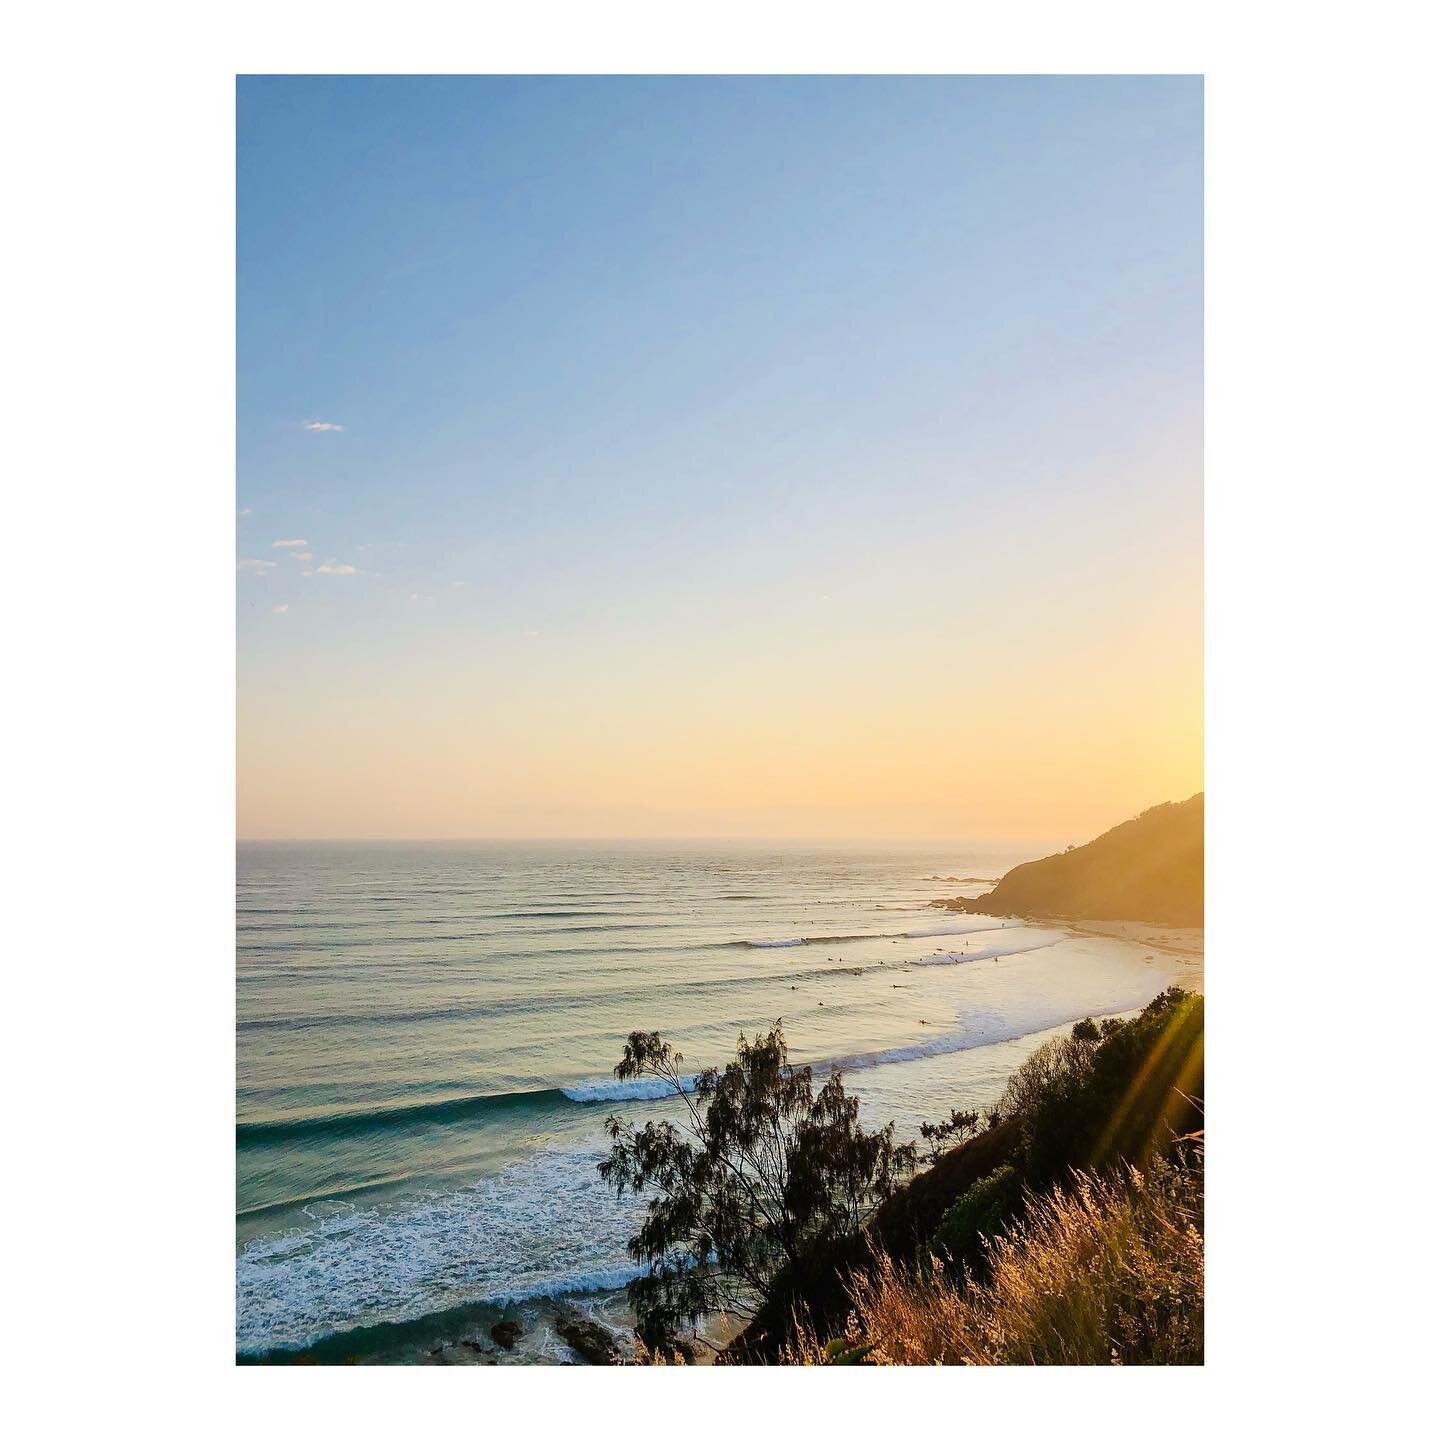 The golds and blues were out this morning&hellip;#byronbay